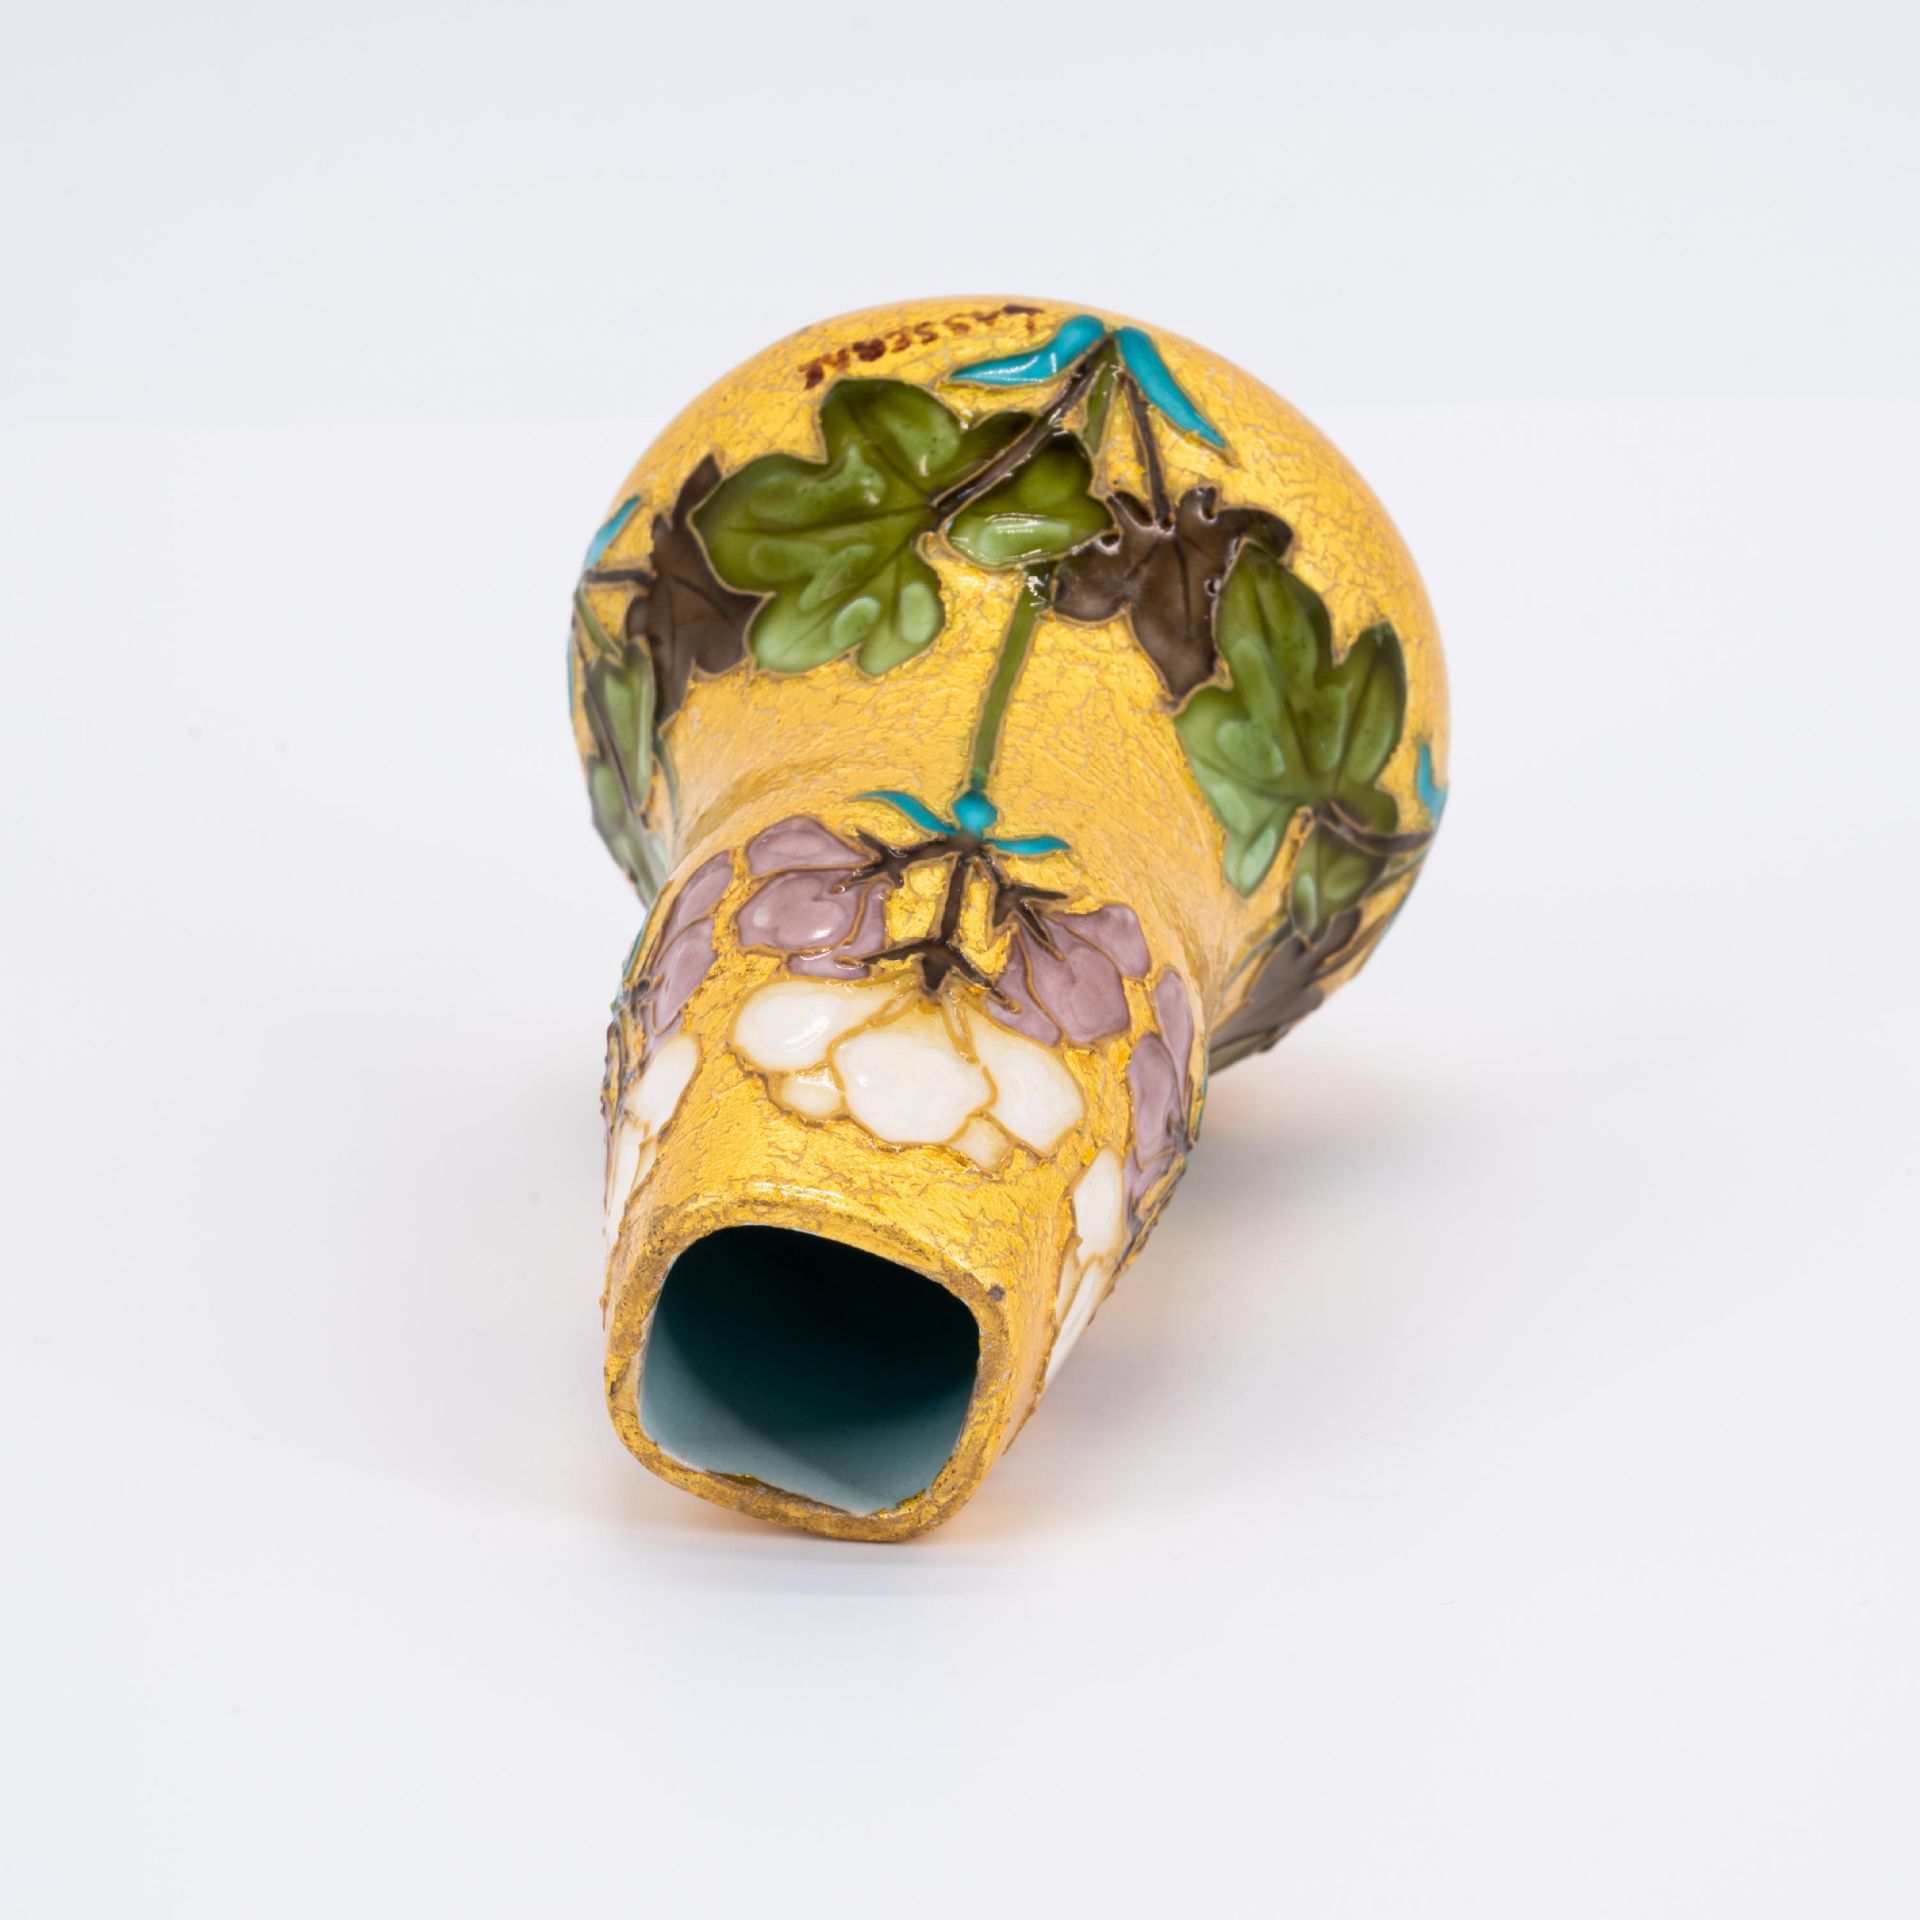 Small vase with floral decor - Image 5 of 7